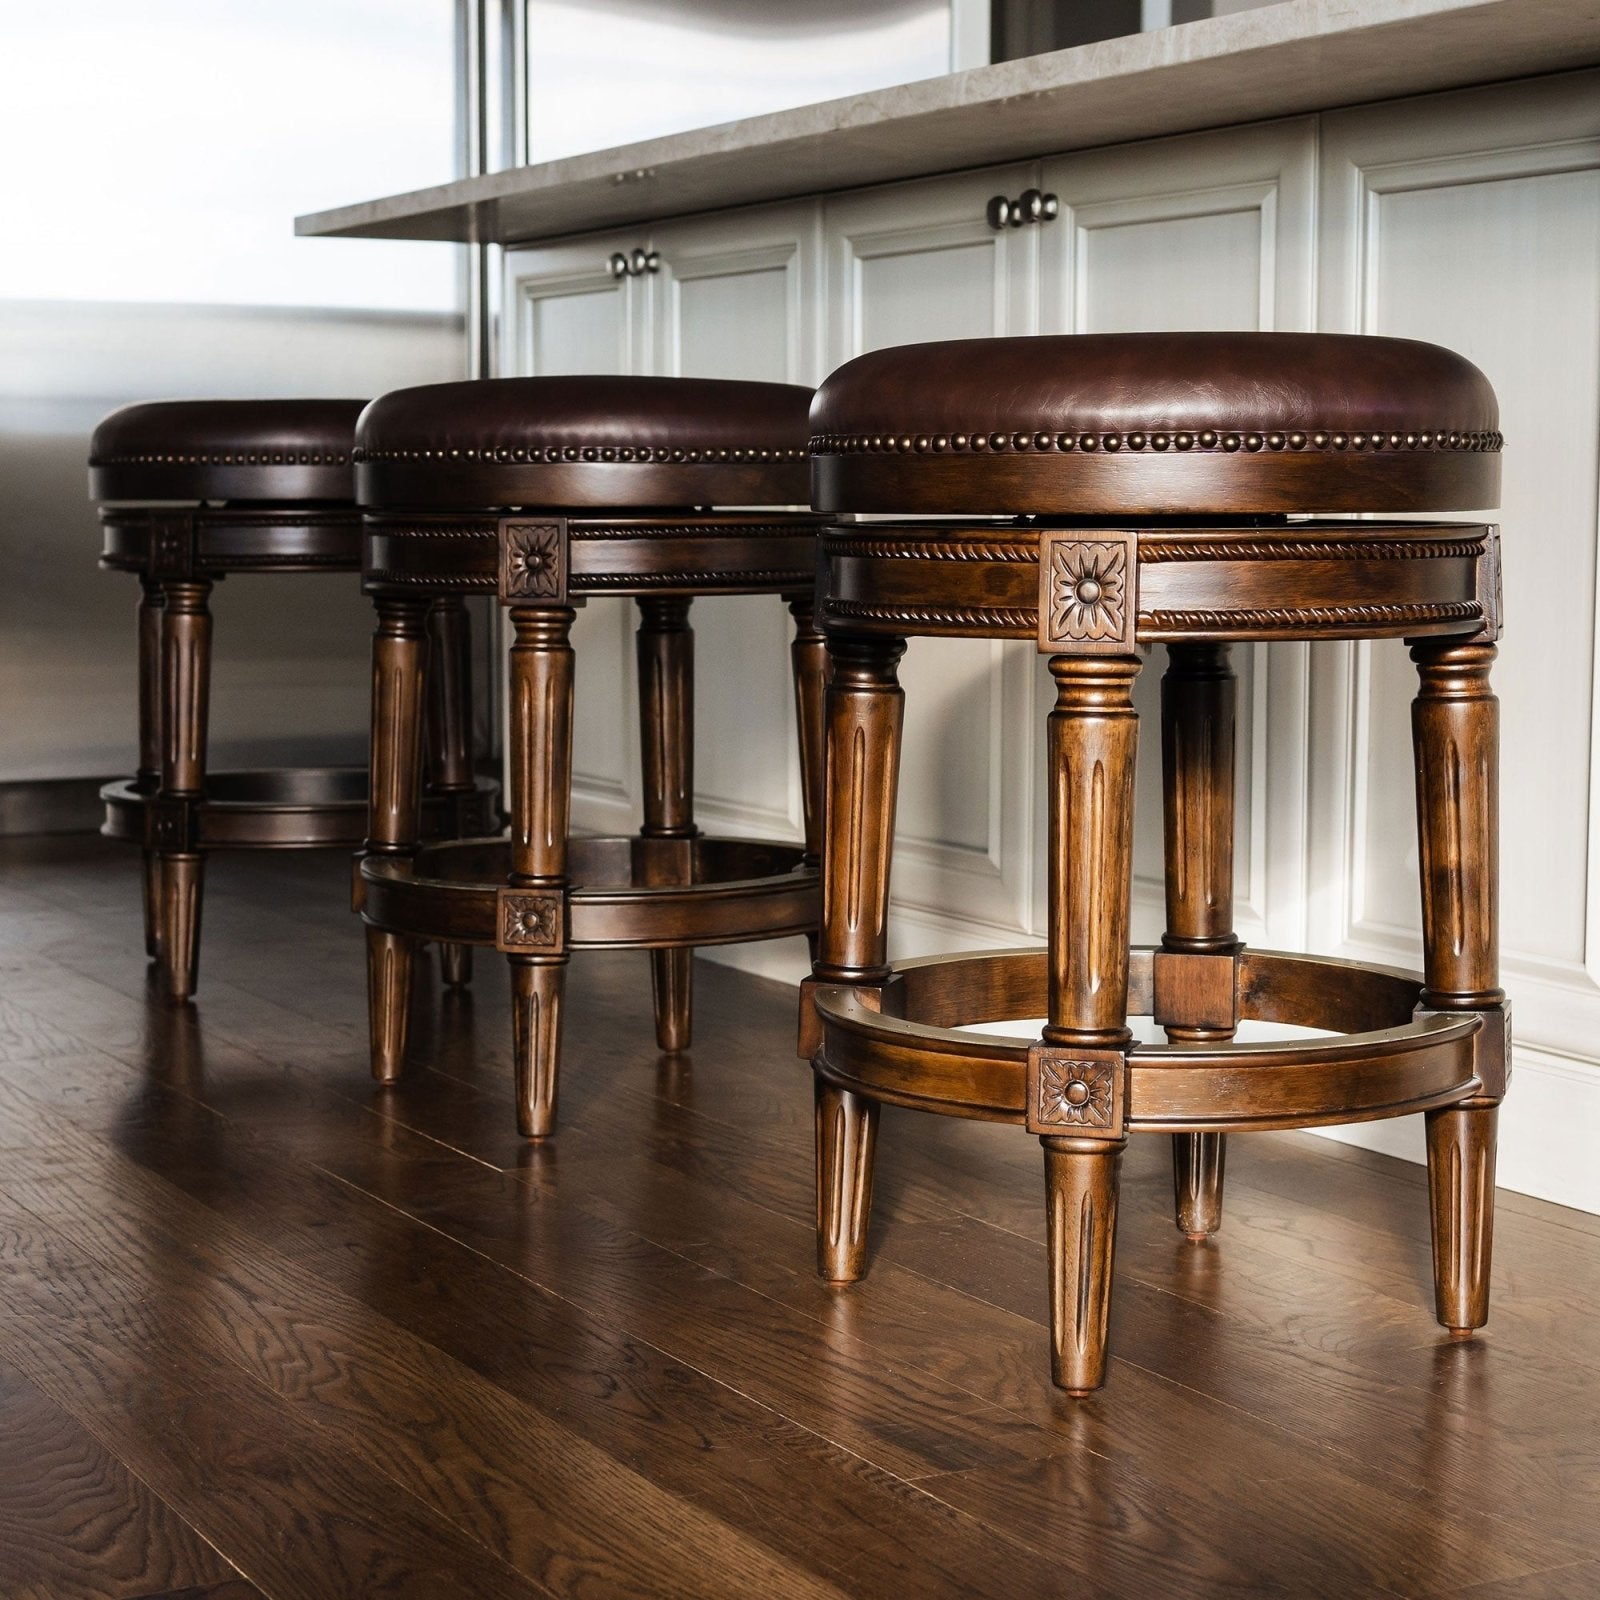 Pullman Backless Counter Stool in Dark Walnut Finish with Vintage Brown Vegan Leather in Stools by Maven Lane